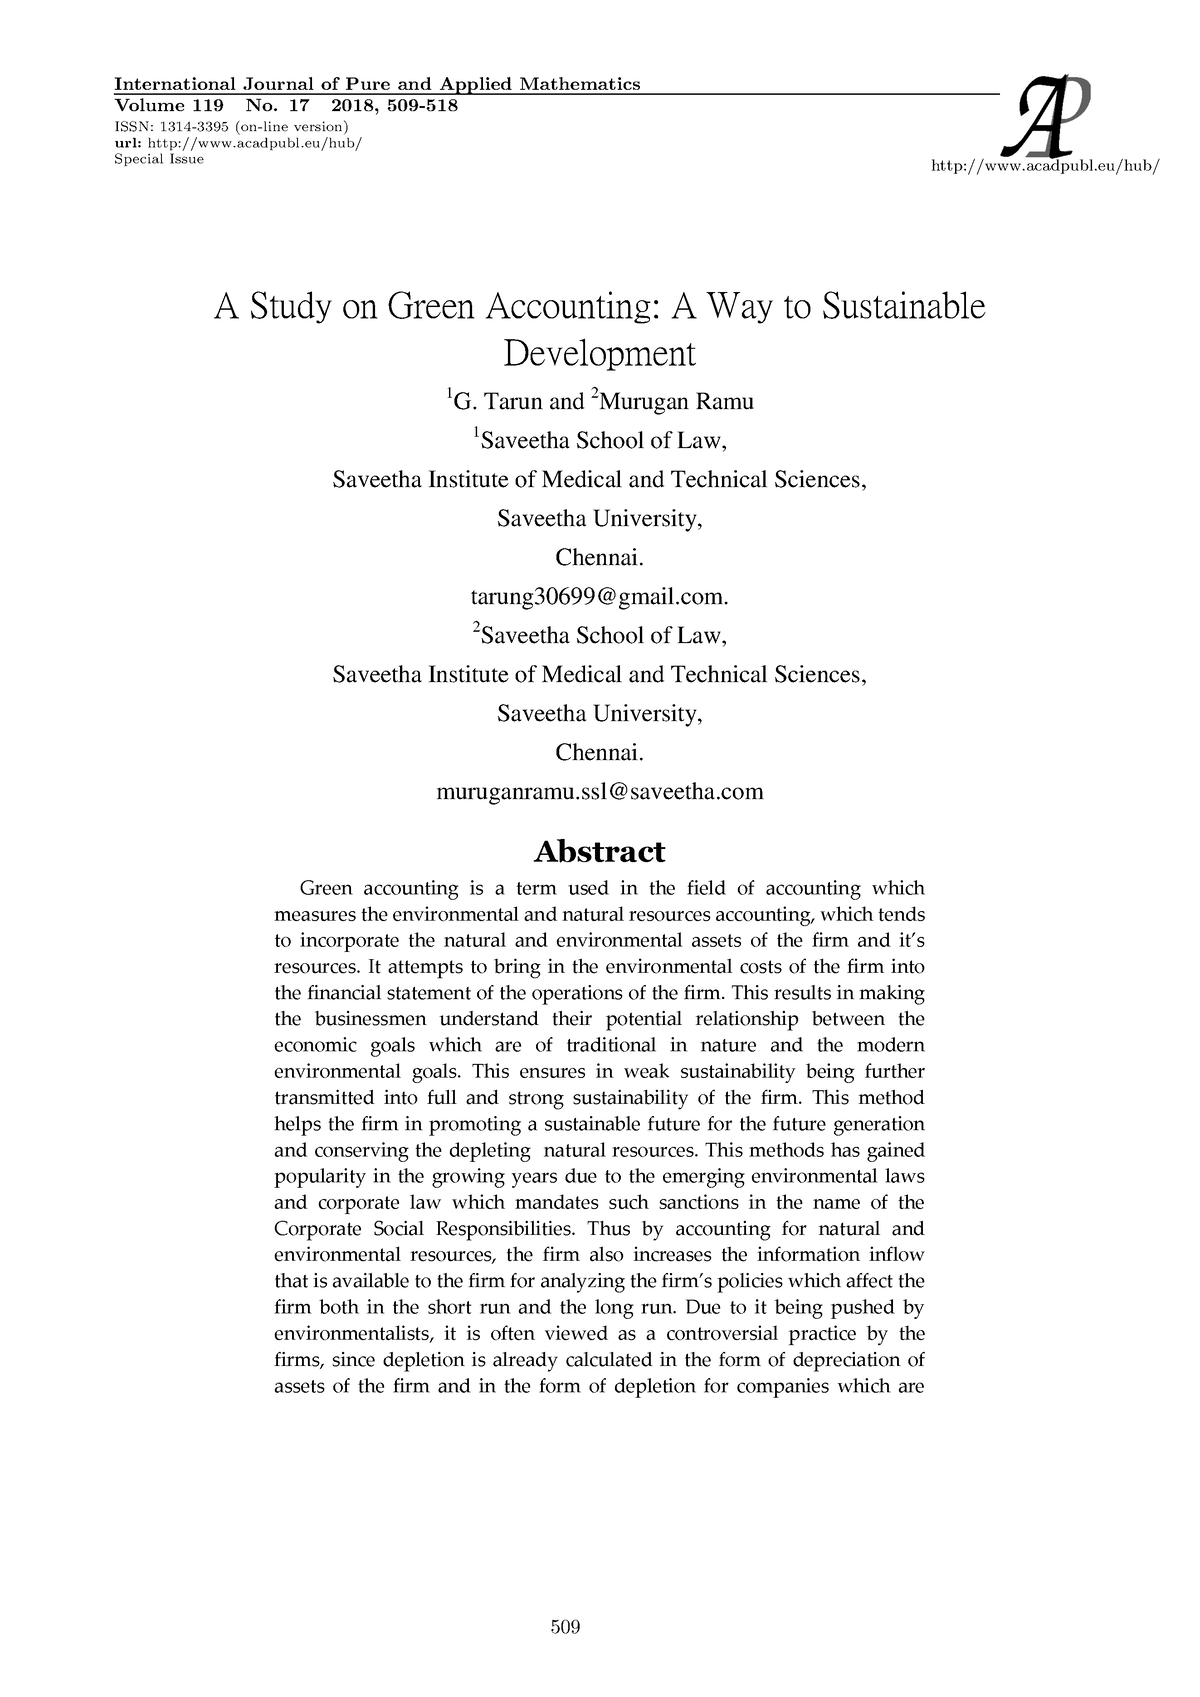 research proposal on green accounting